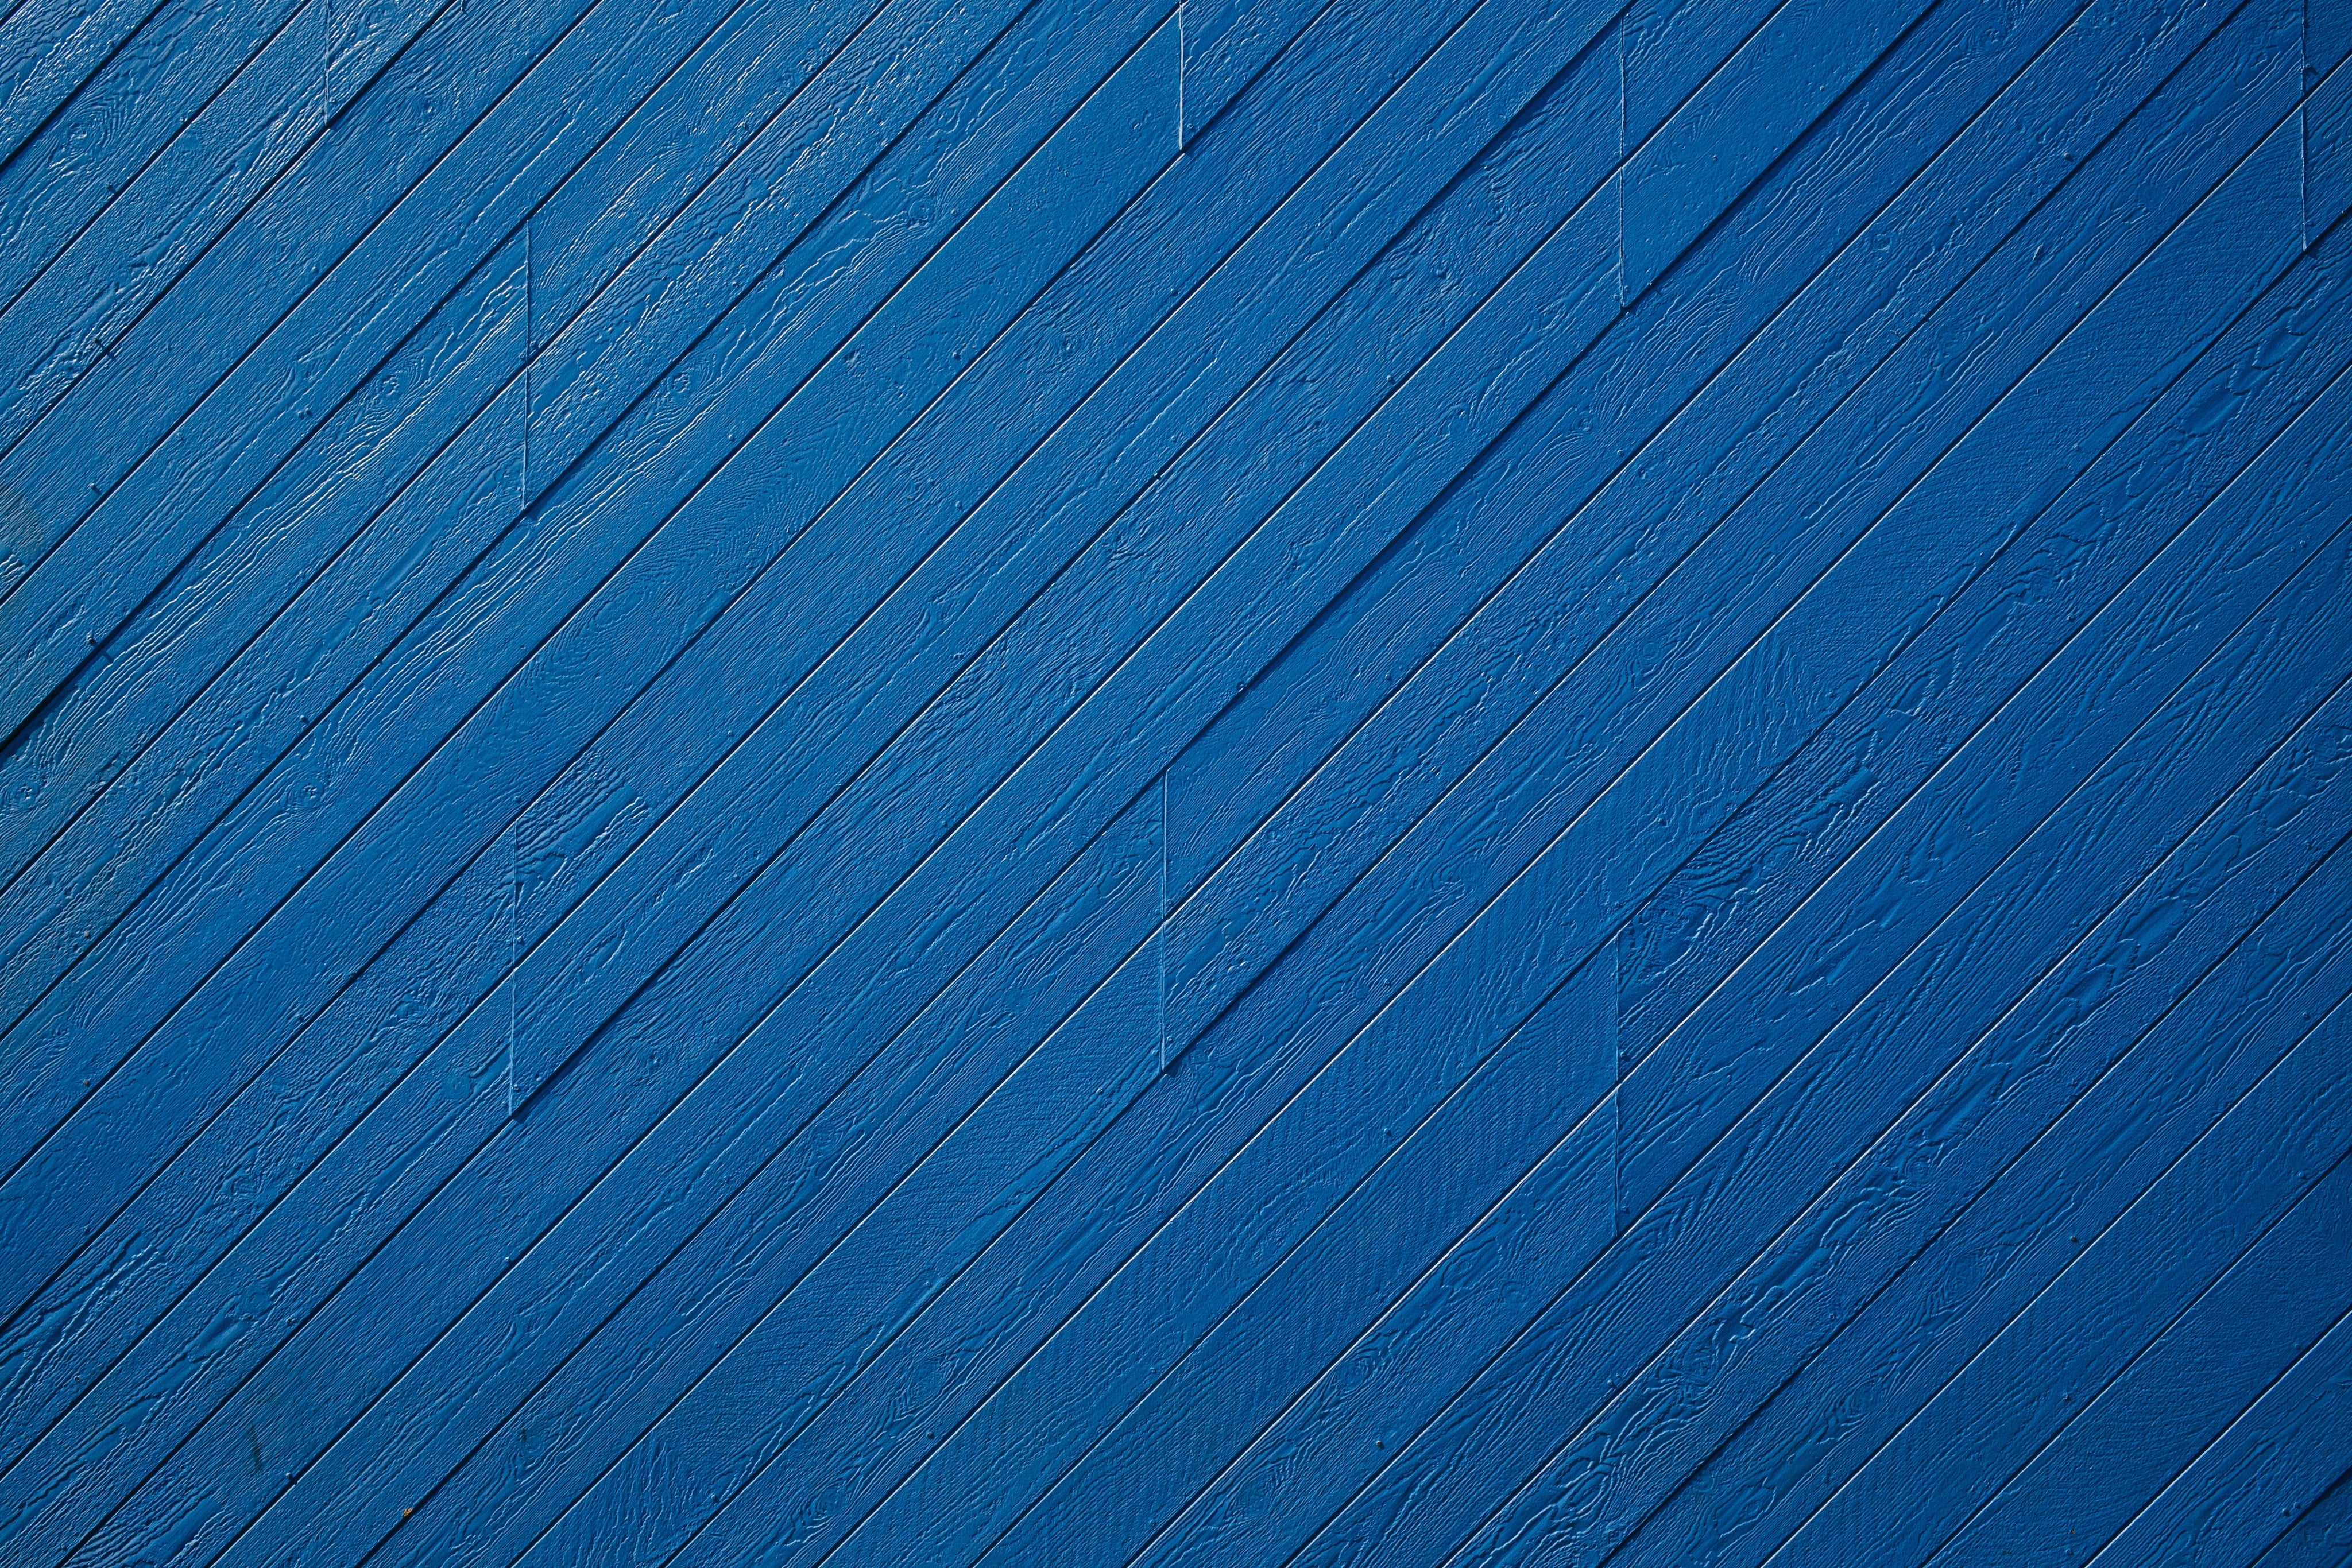 texture-of-wood-cladding-painted-blue.jpg